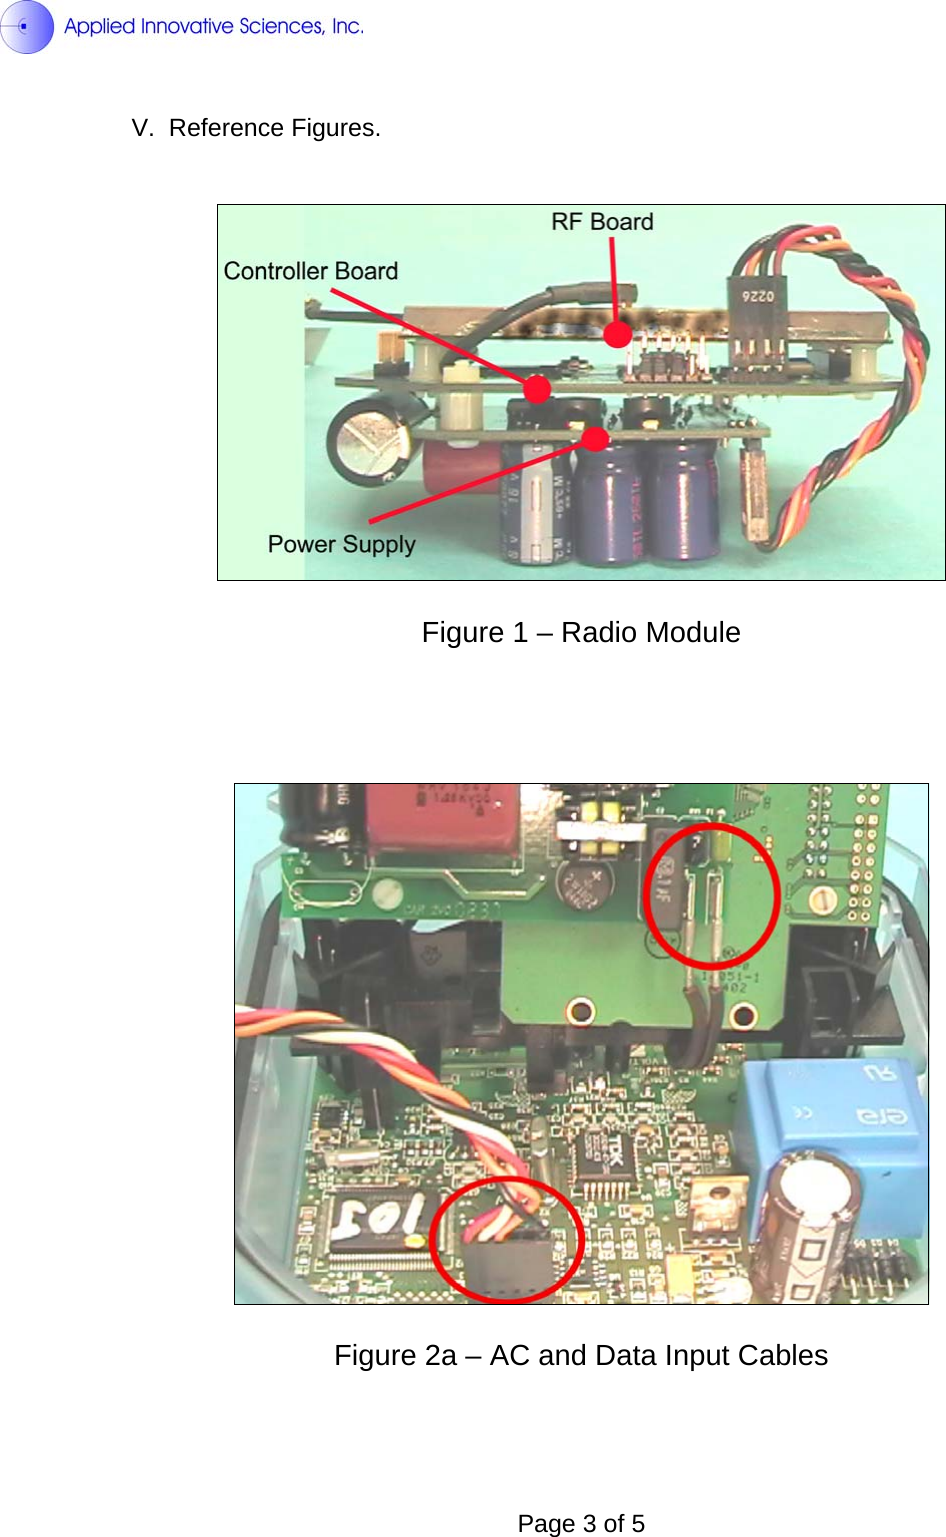  V. Reference Figures.     Figure 1 – Radio Module       Figure 2a – AC and Data Input Cables    Page 3 of 5 